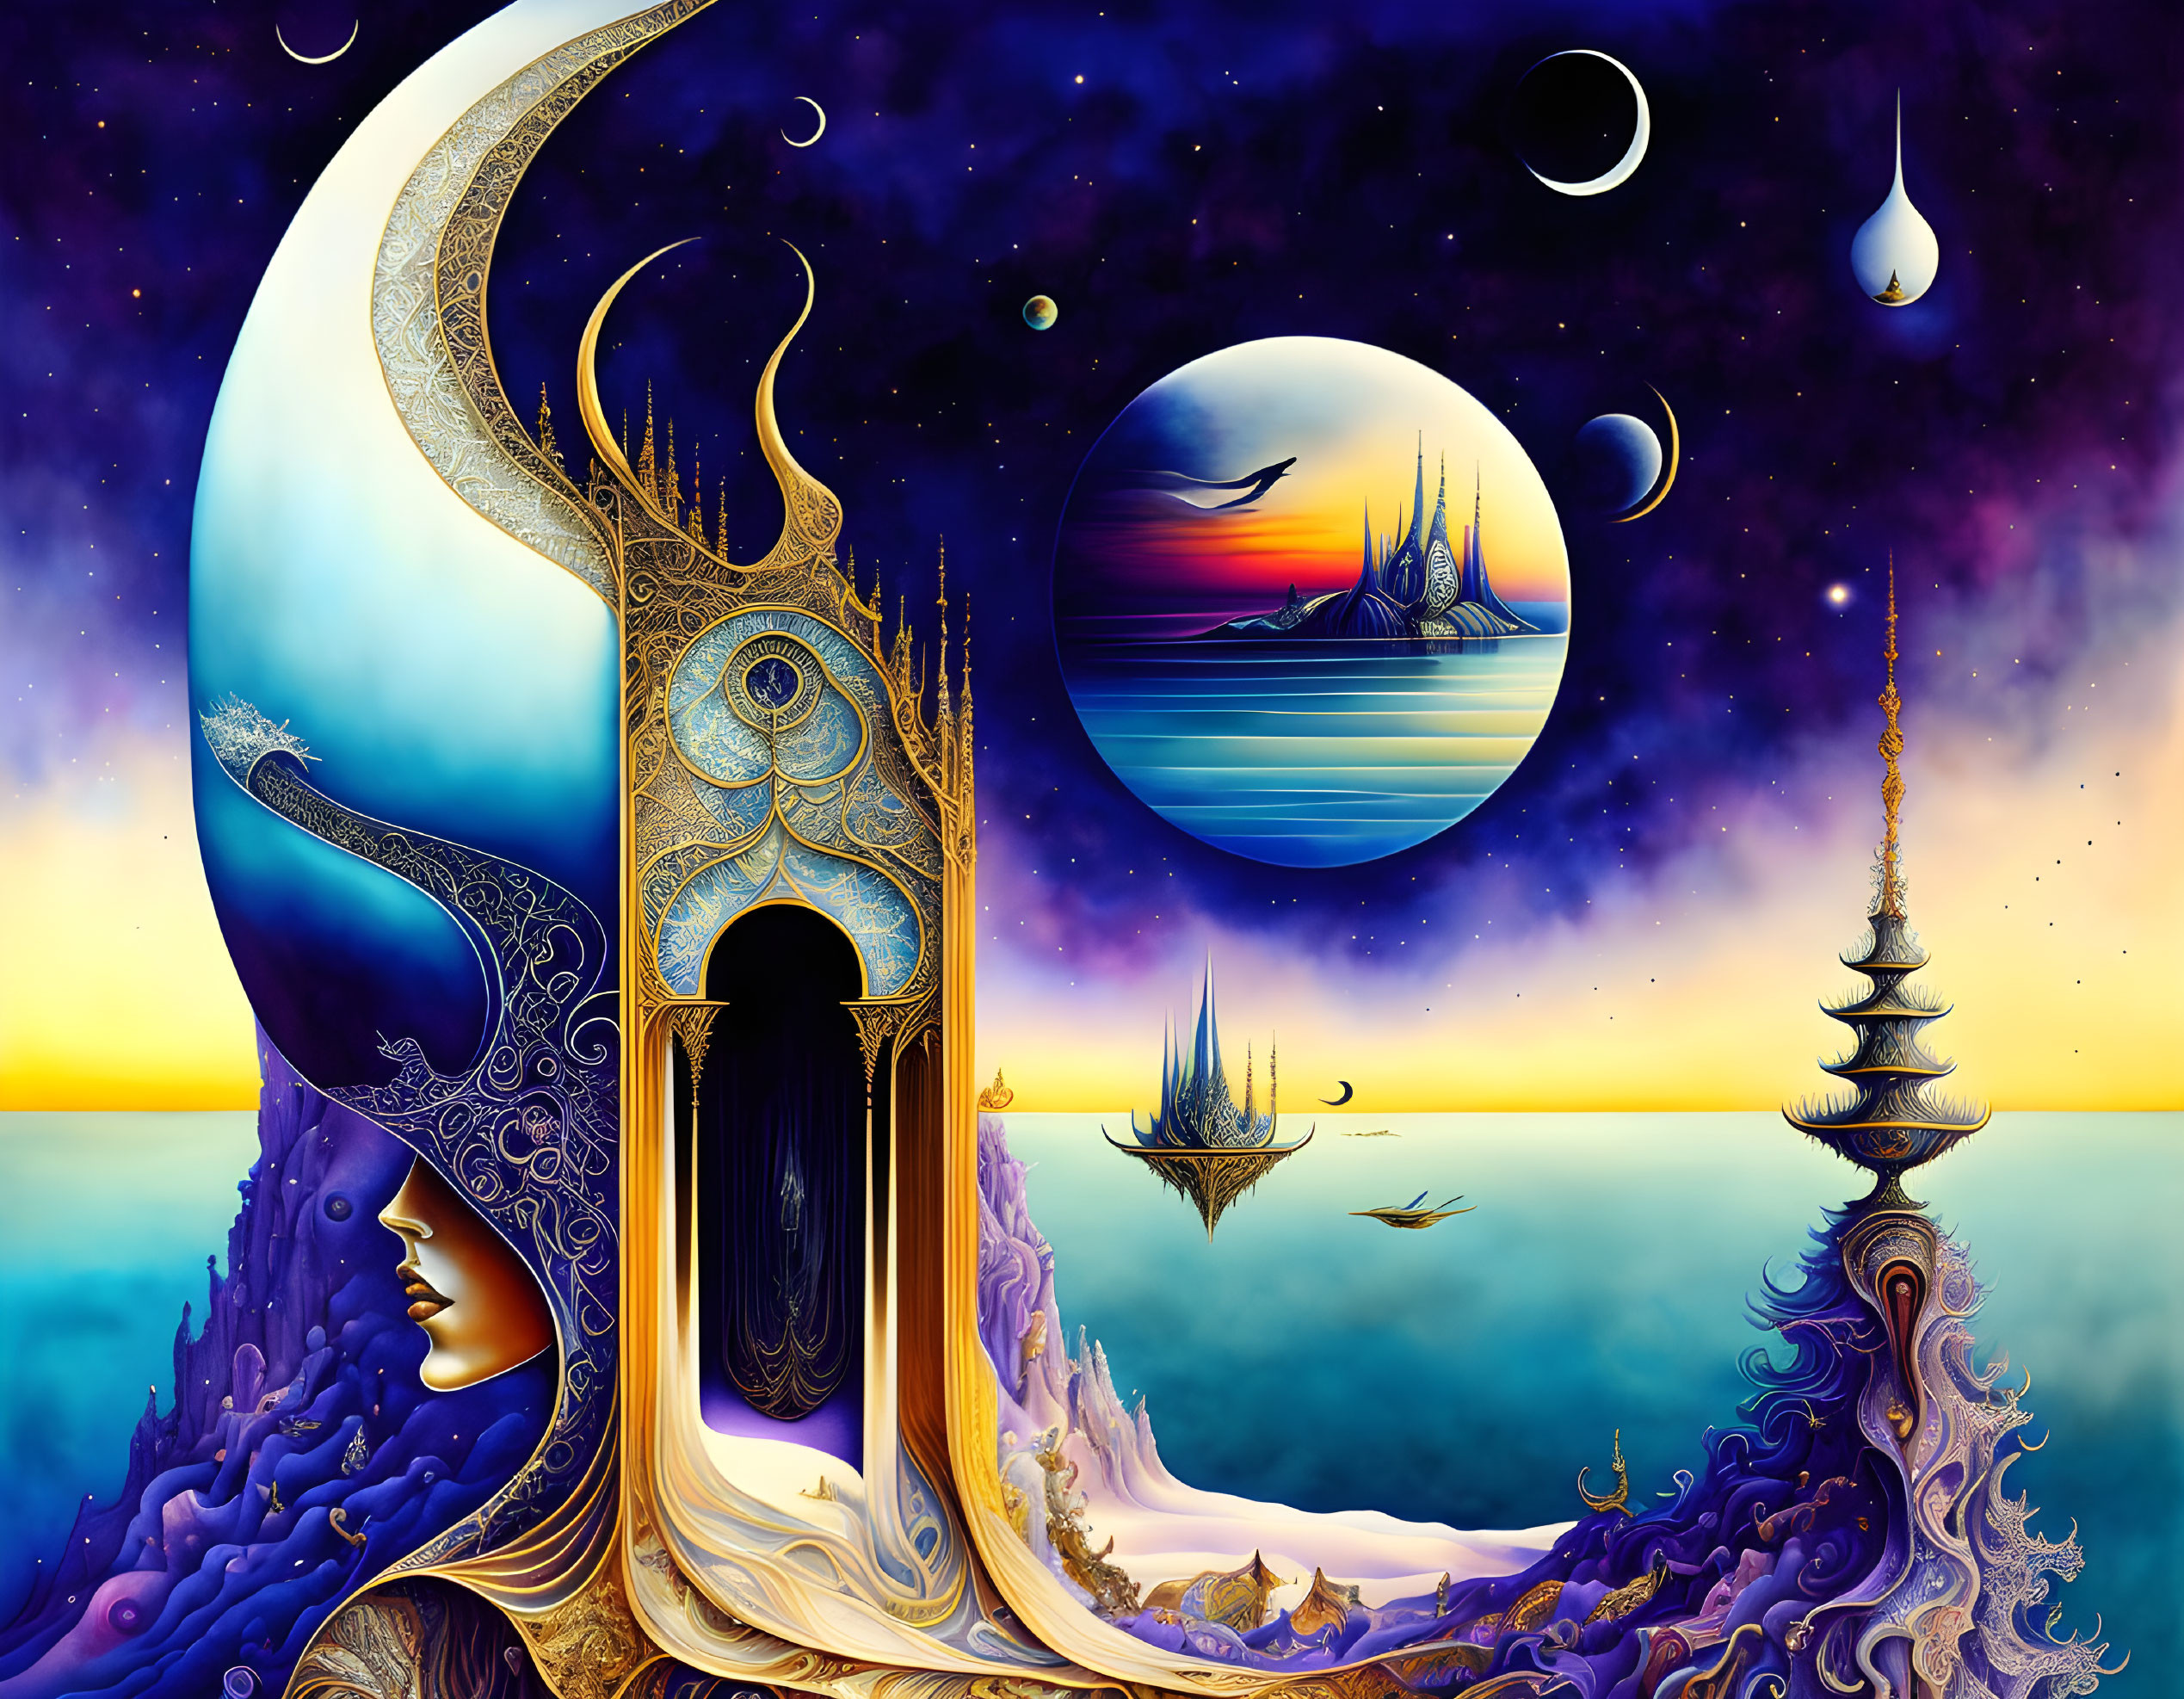 Surreal artwork: Moon-faced profile, ornate doorway, seascape with ships, floating islands